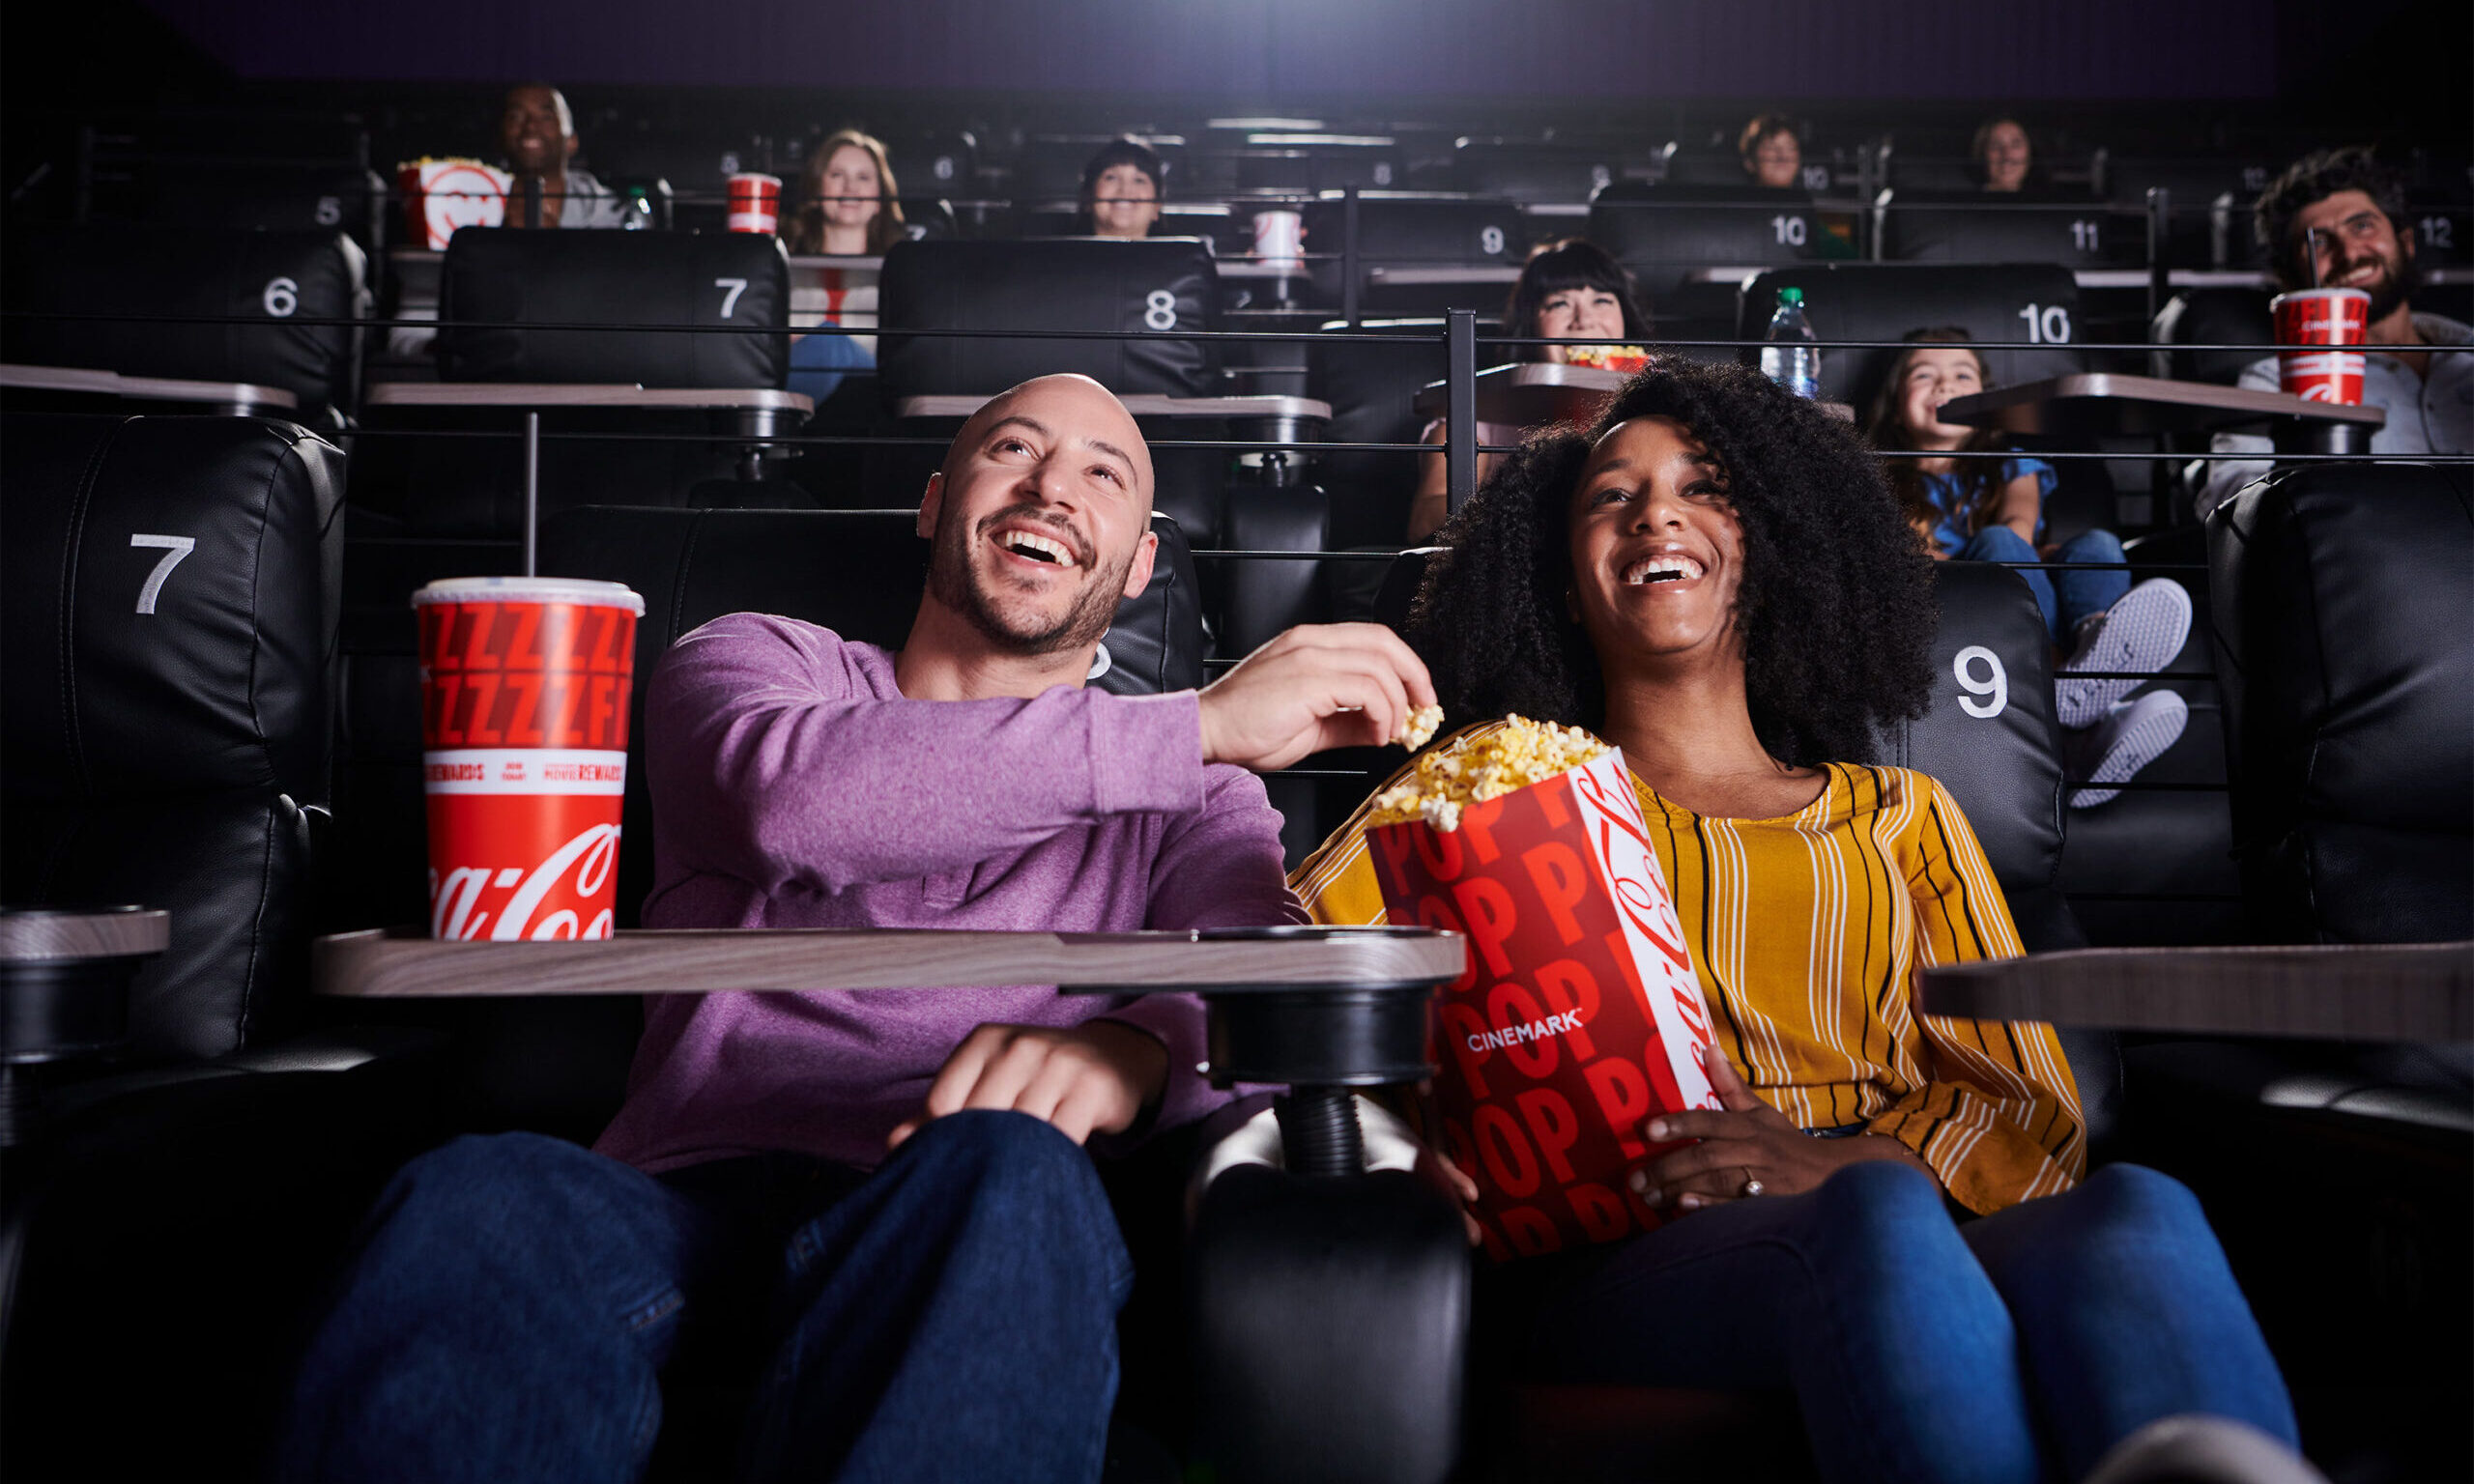 Cinemark utilizes Rokt’s solutions to drive incremental revenue and acquire new customers